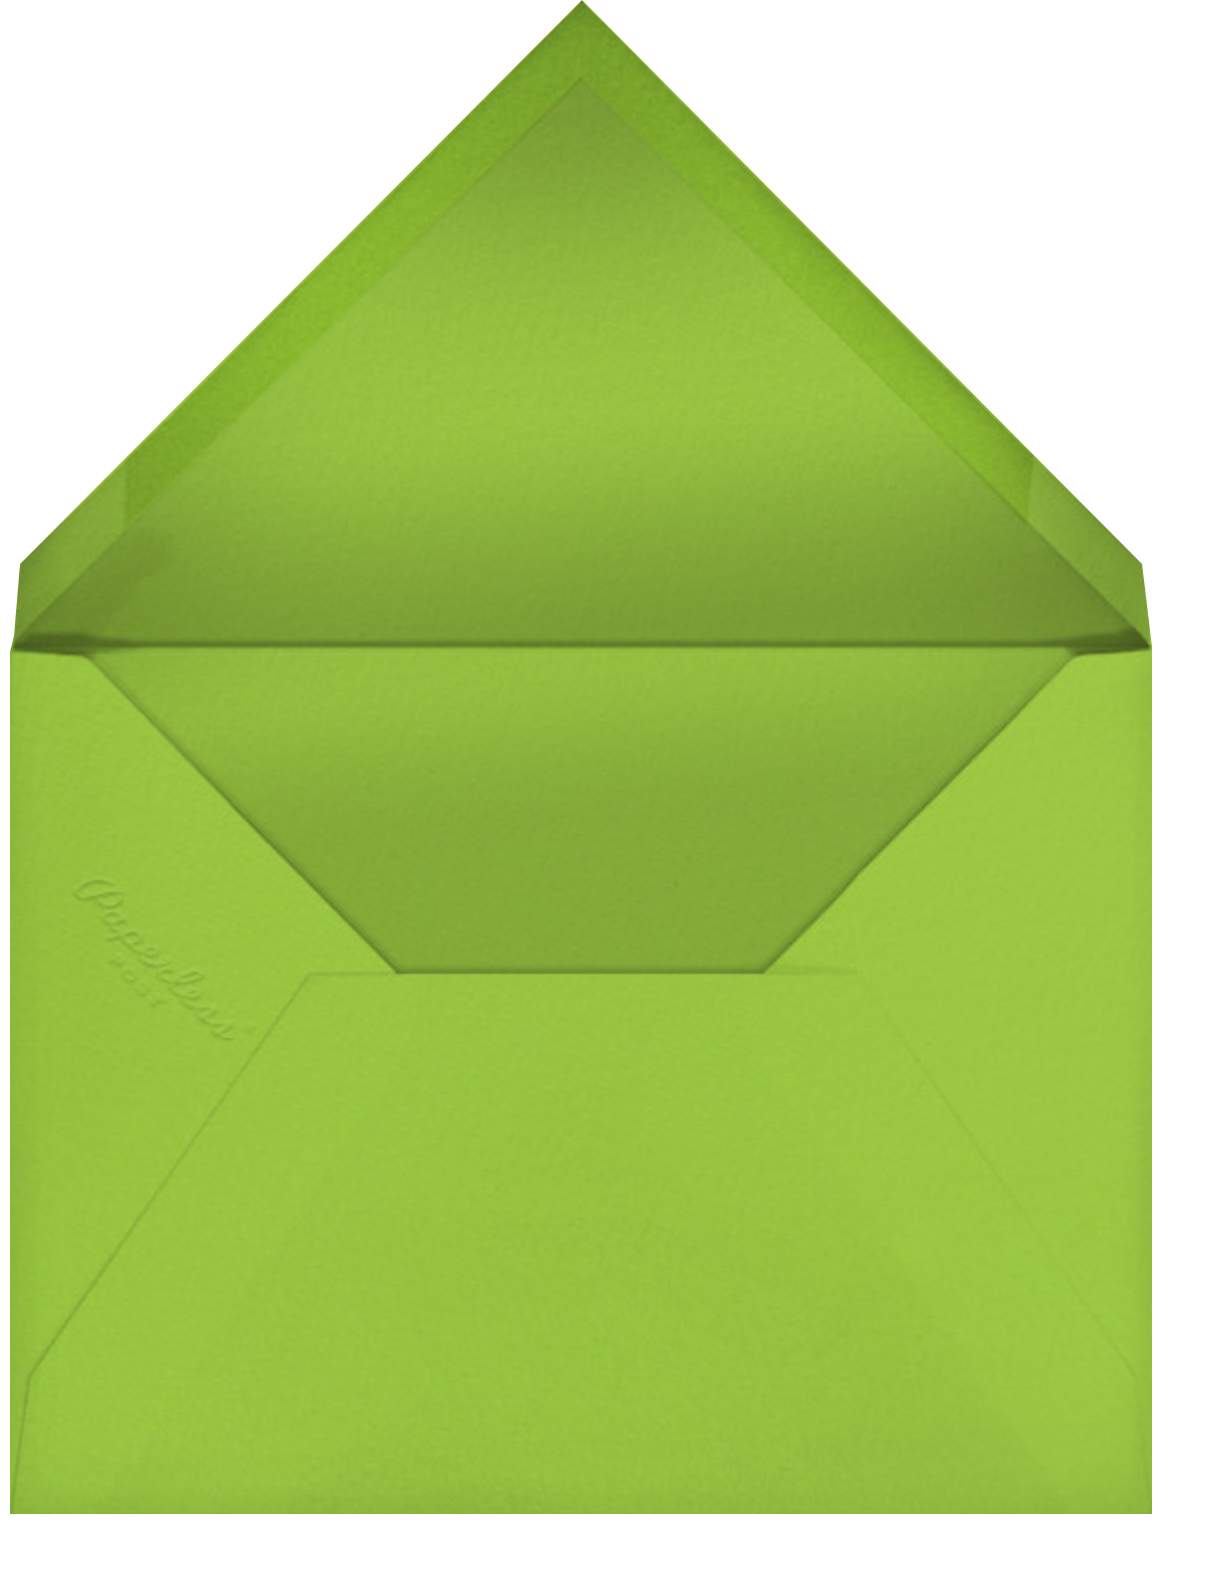 Casual Thanks (Green) - Paperless Post - Envelope